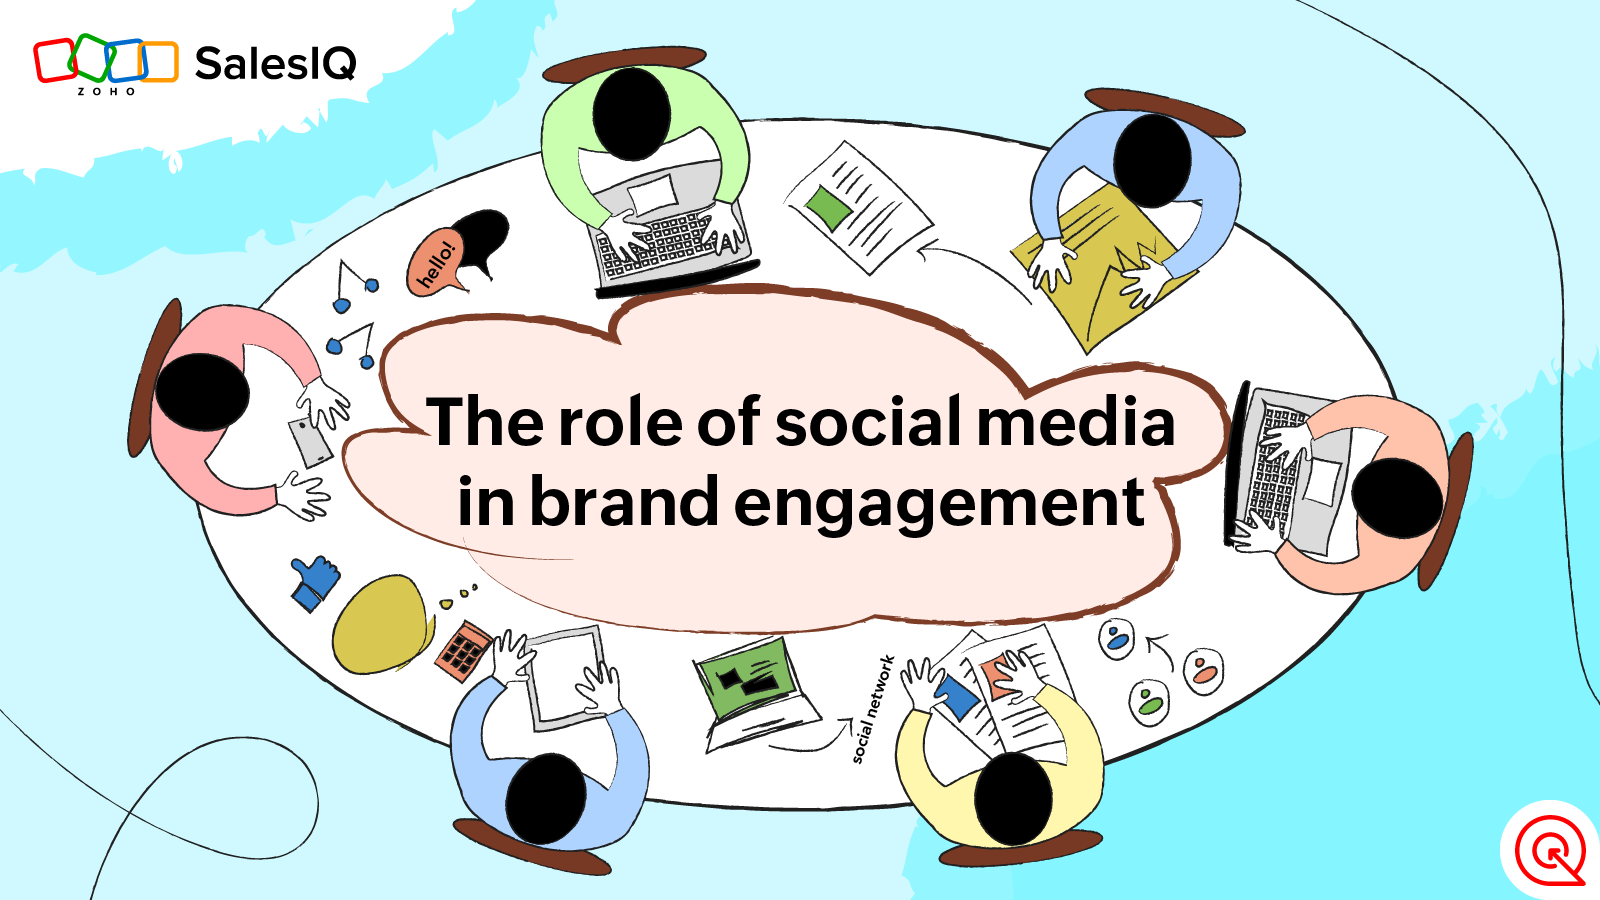 The role of social media in brand engagement